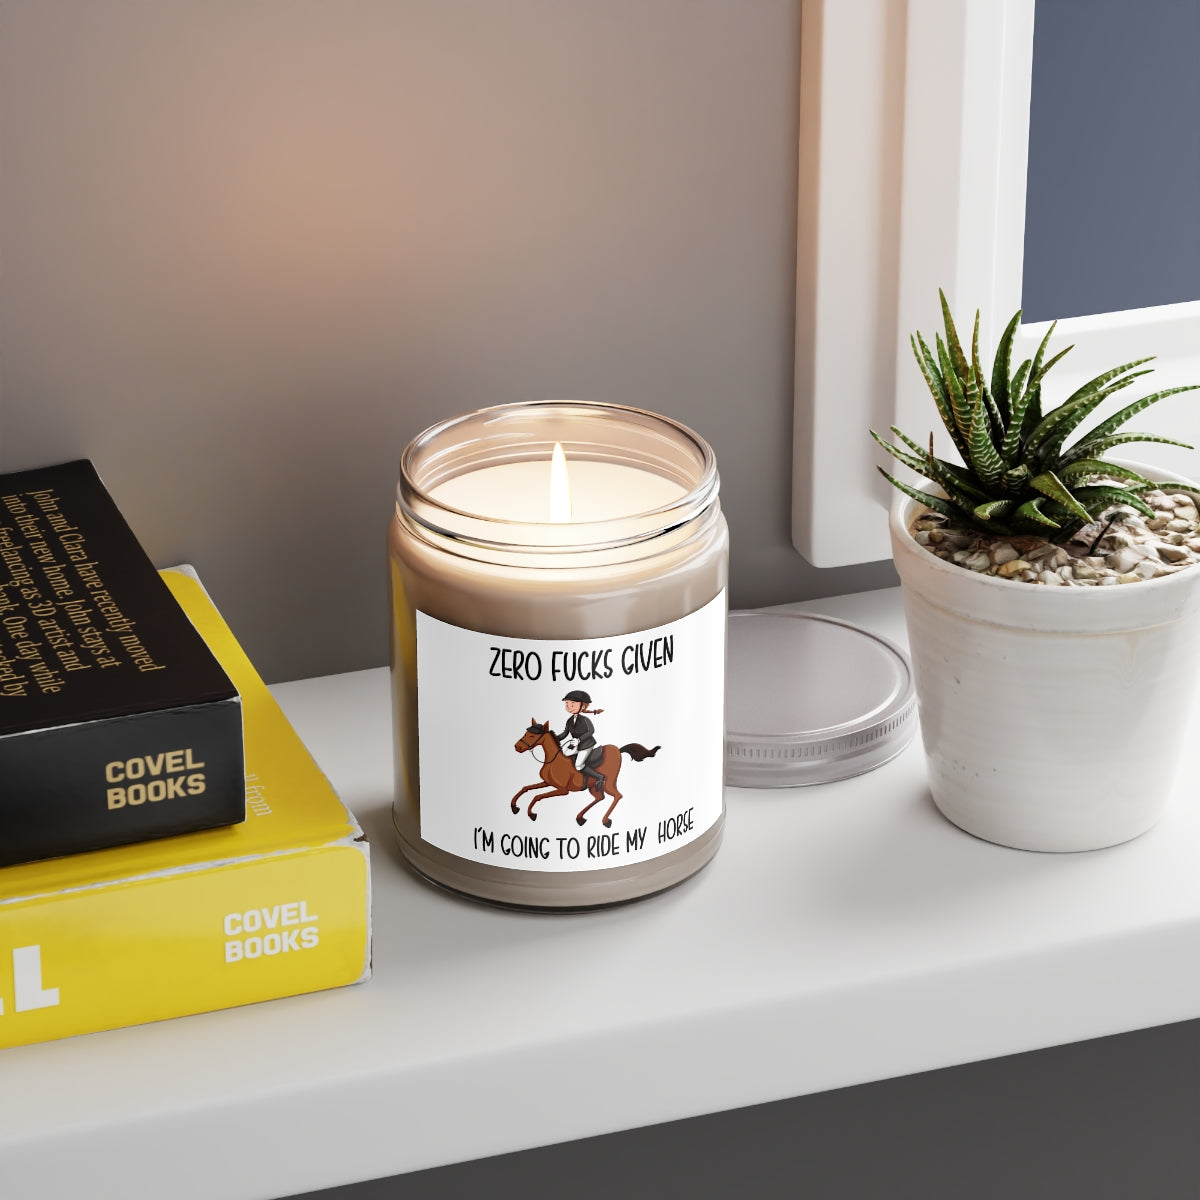 Equestrian Candle English Rider Funny Candle Zero Fucks Given Scented Candles 9 ounce Soy Candle